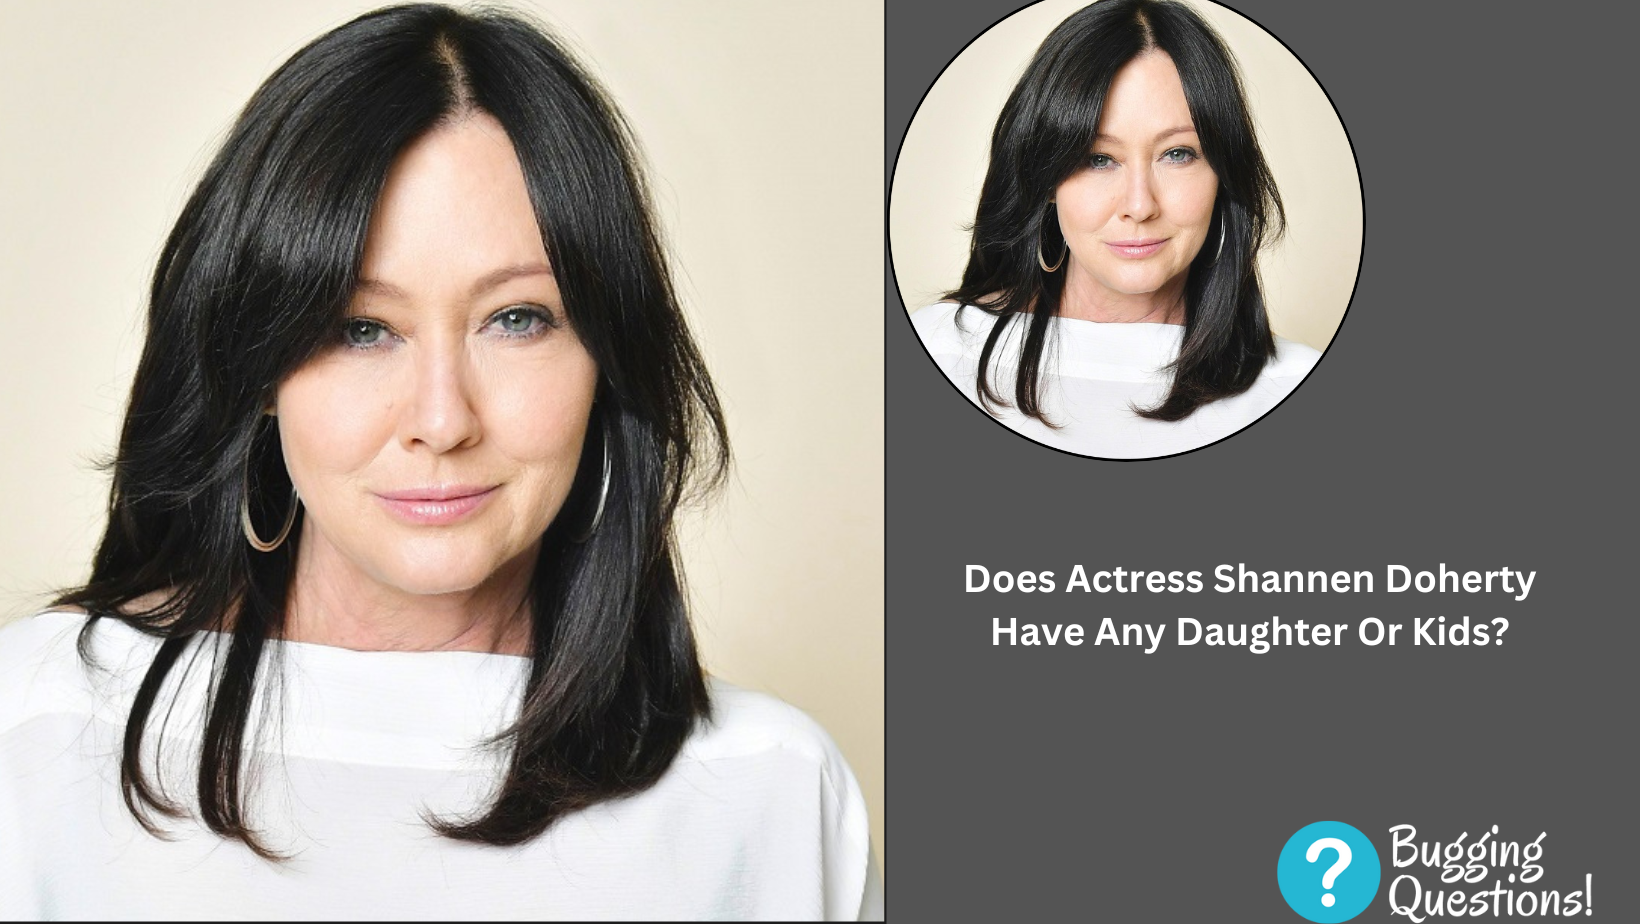 Does Actress Shannen Doherty Have Any Daughter Or Kids?